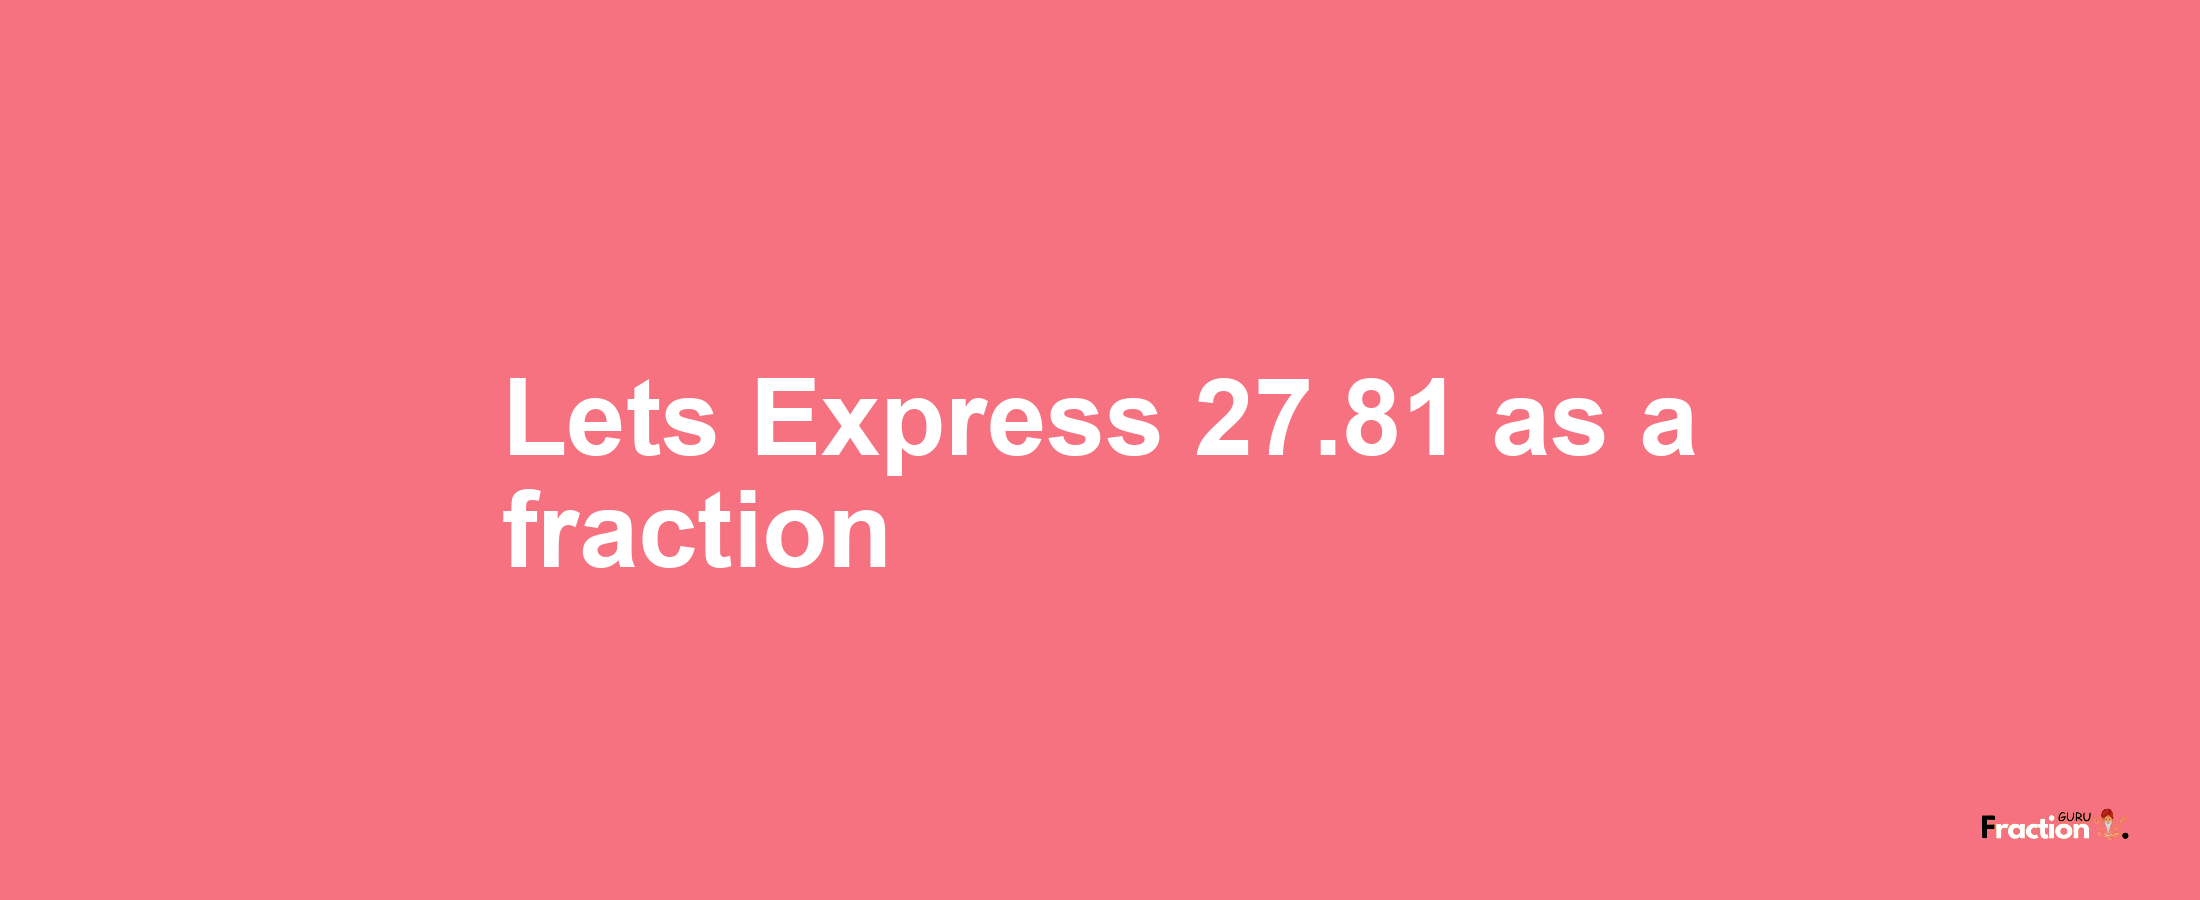 Lets Express 27.81 as afraction